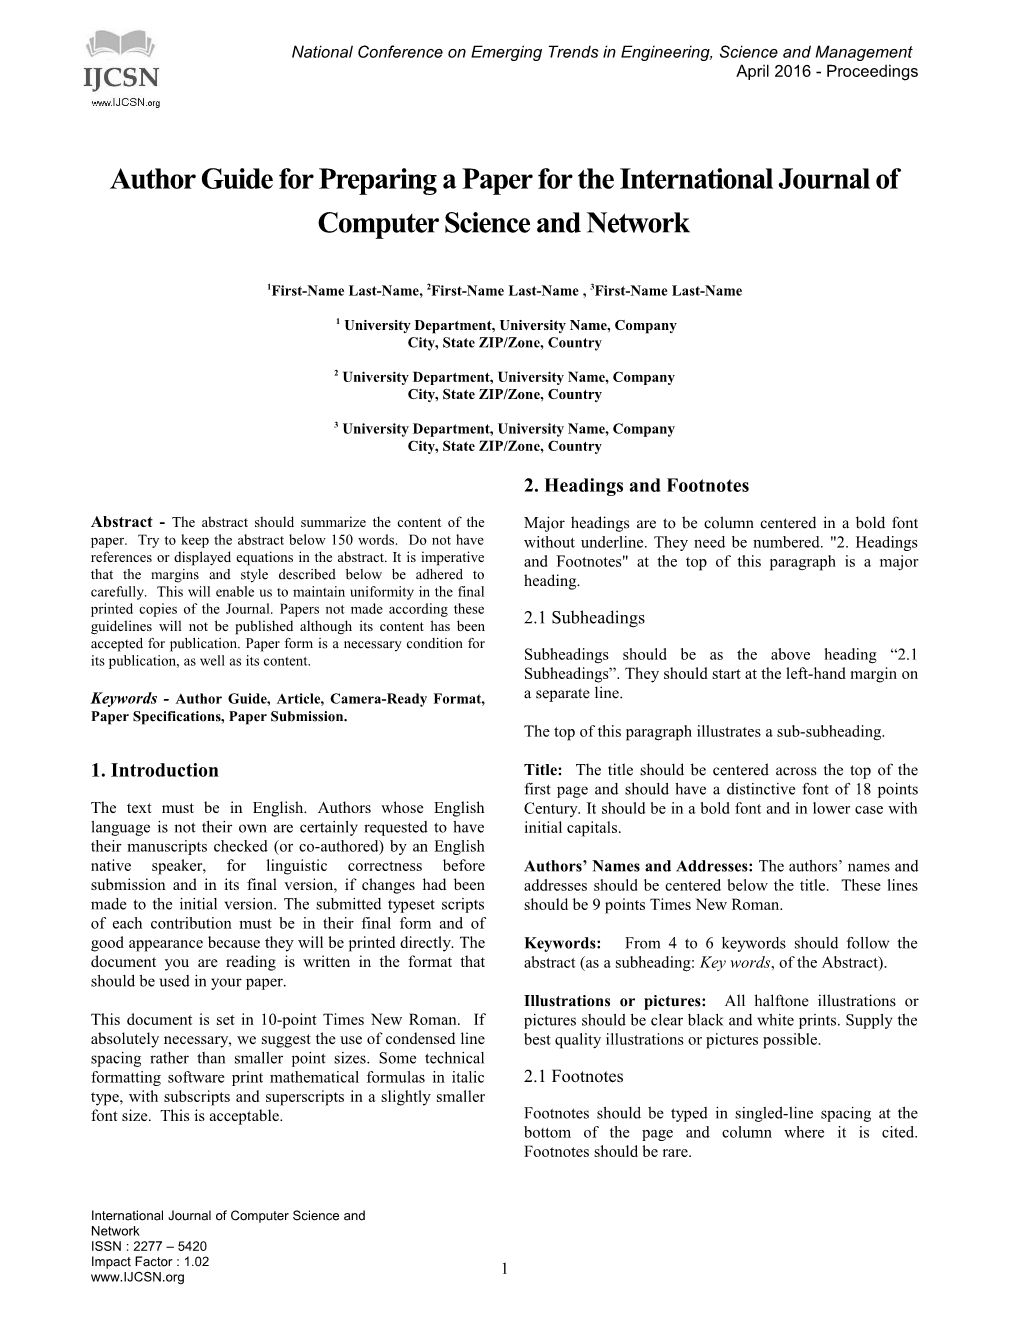 Author Guide for Preparing a Paper for the International Journal of Computer Science And